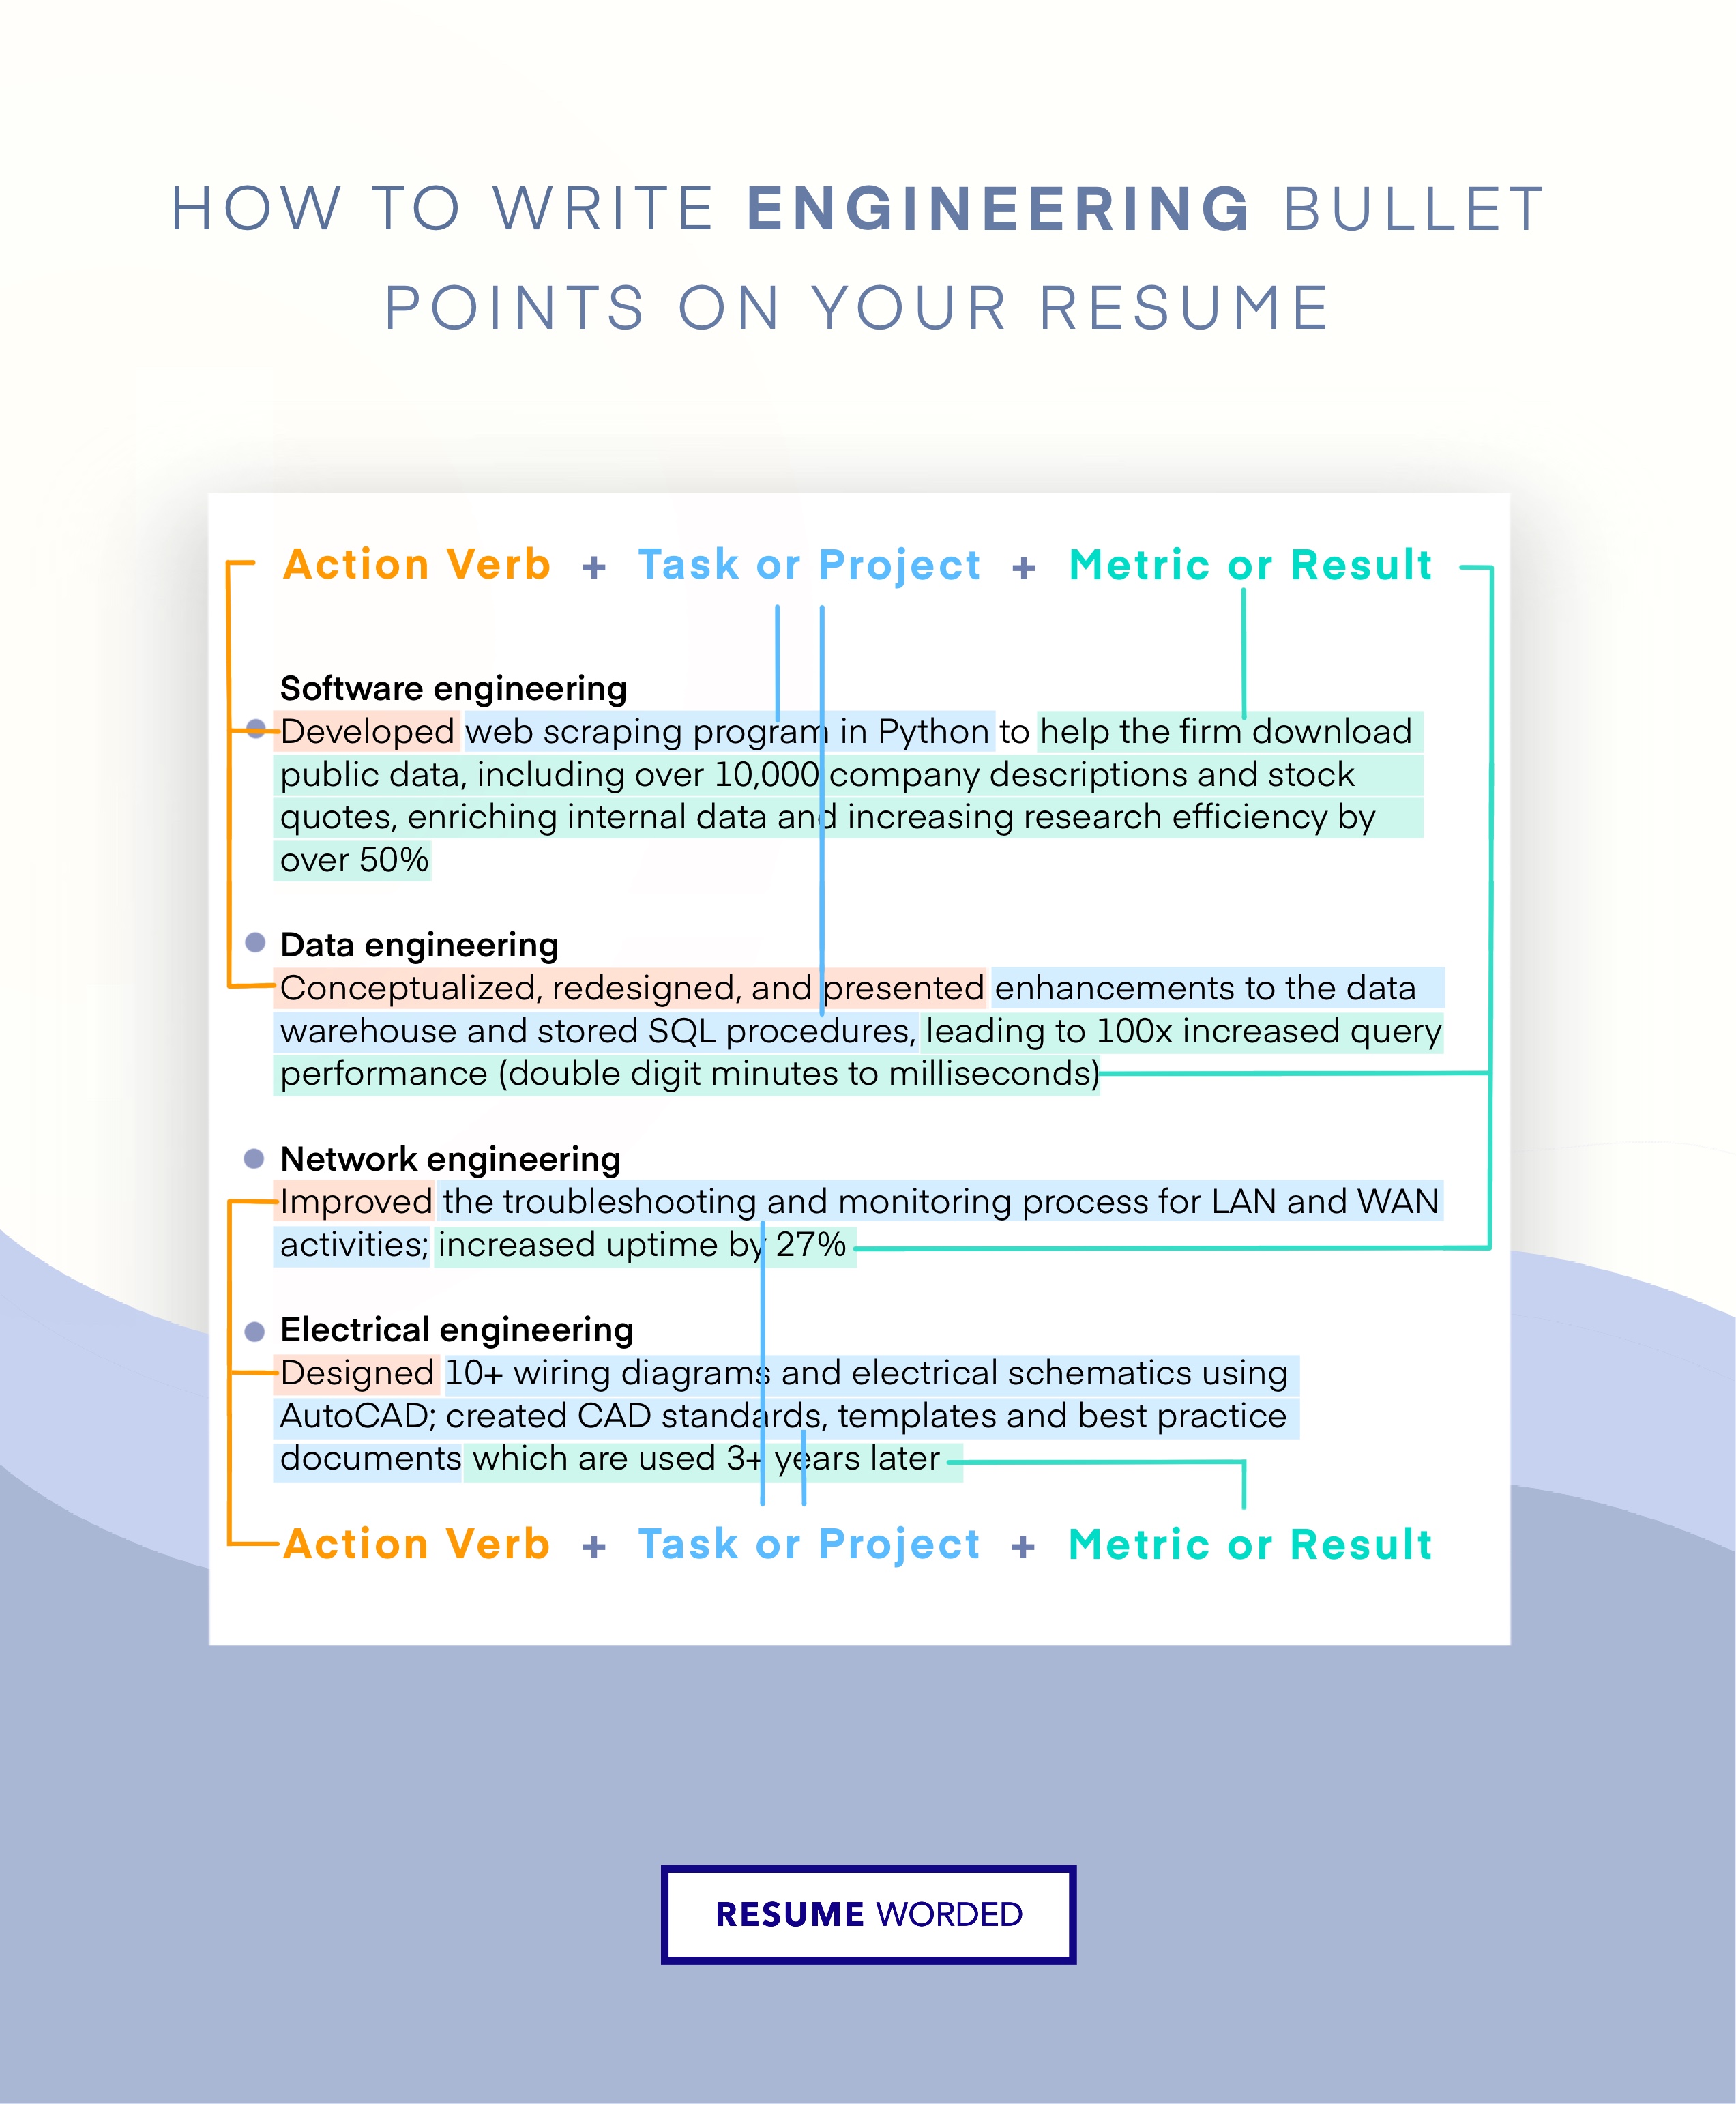 Prioritize your technical acumen - Senior Engineering Manager CV